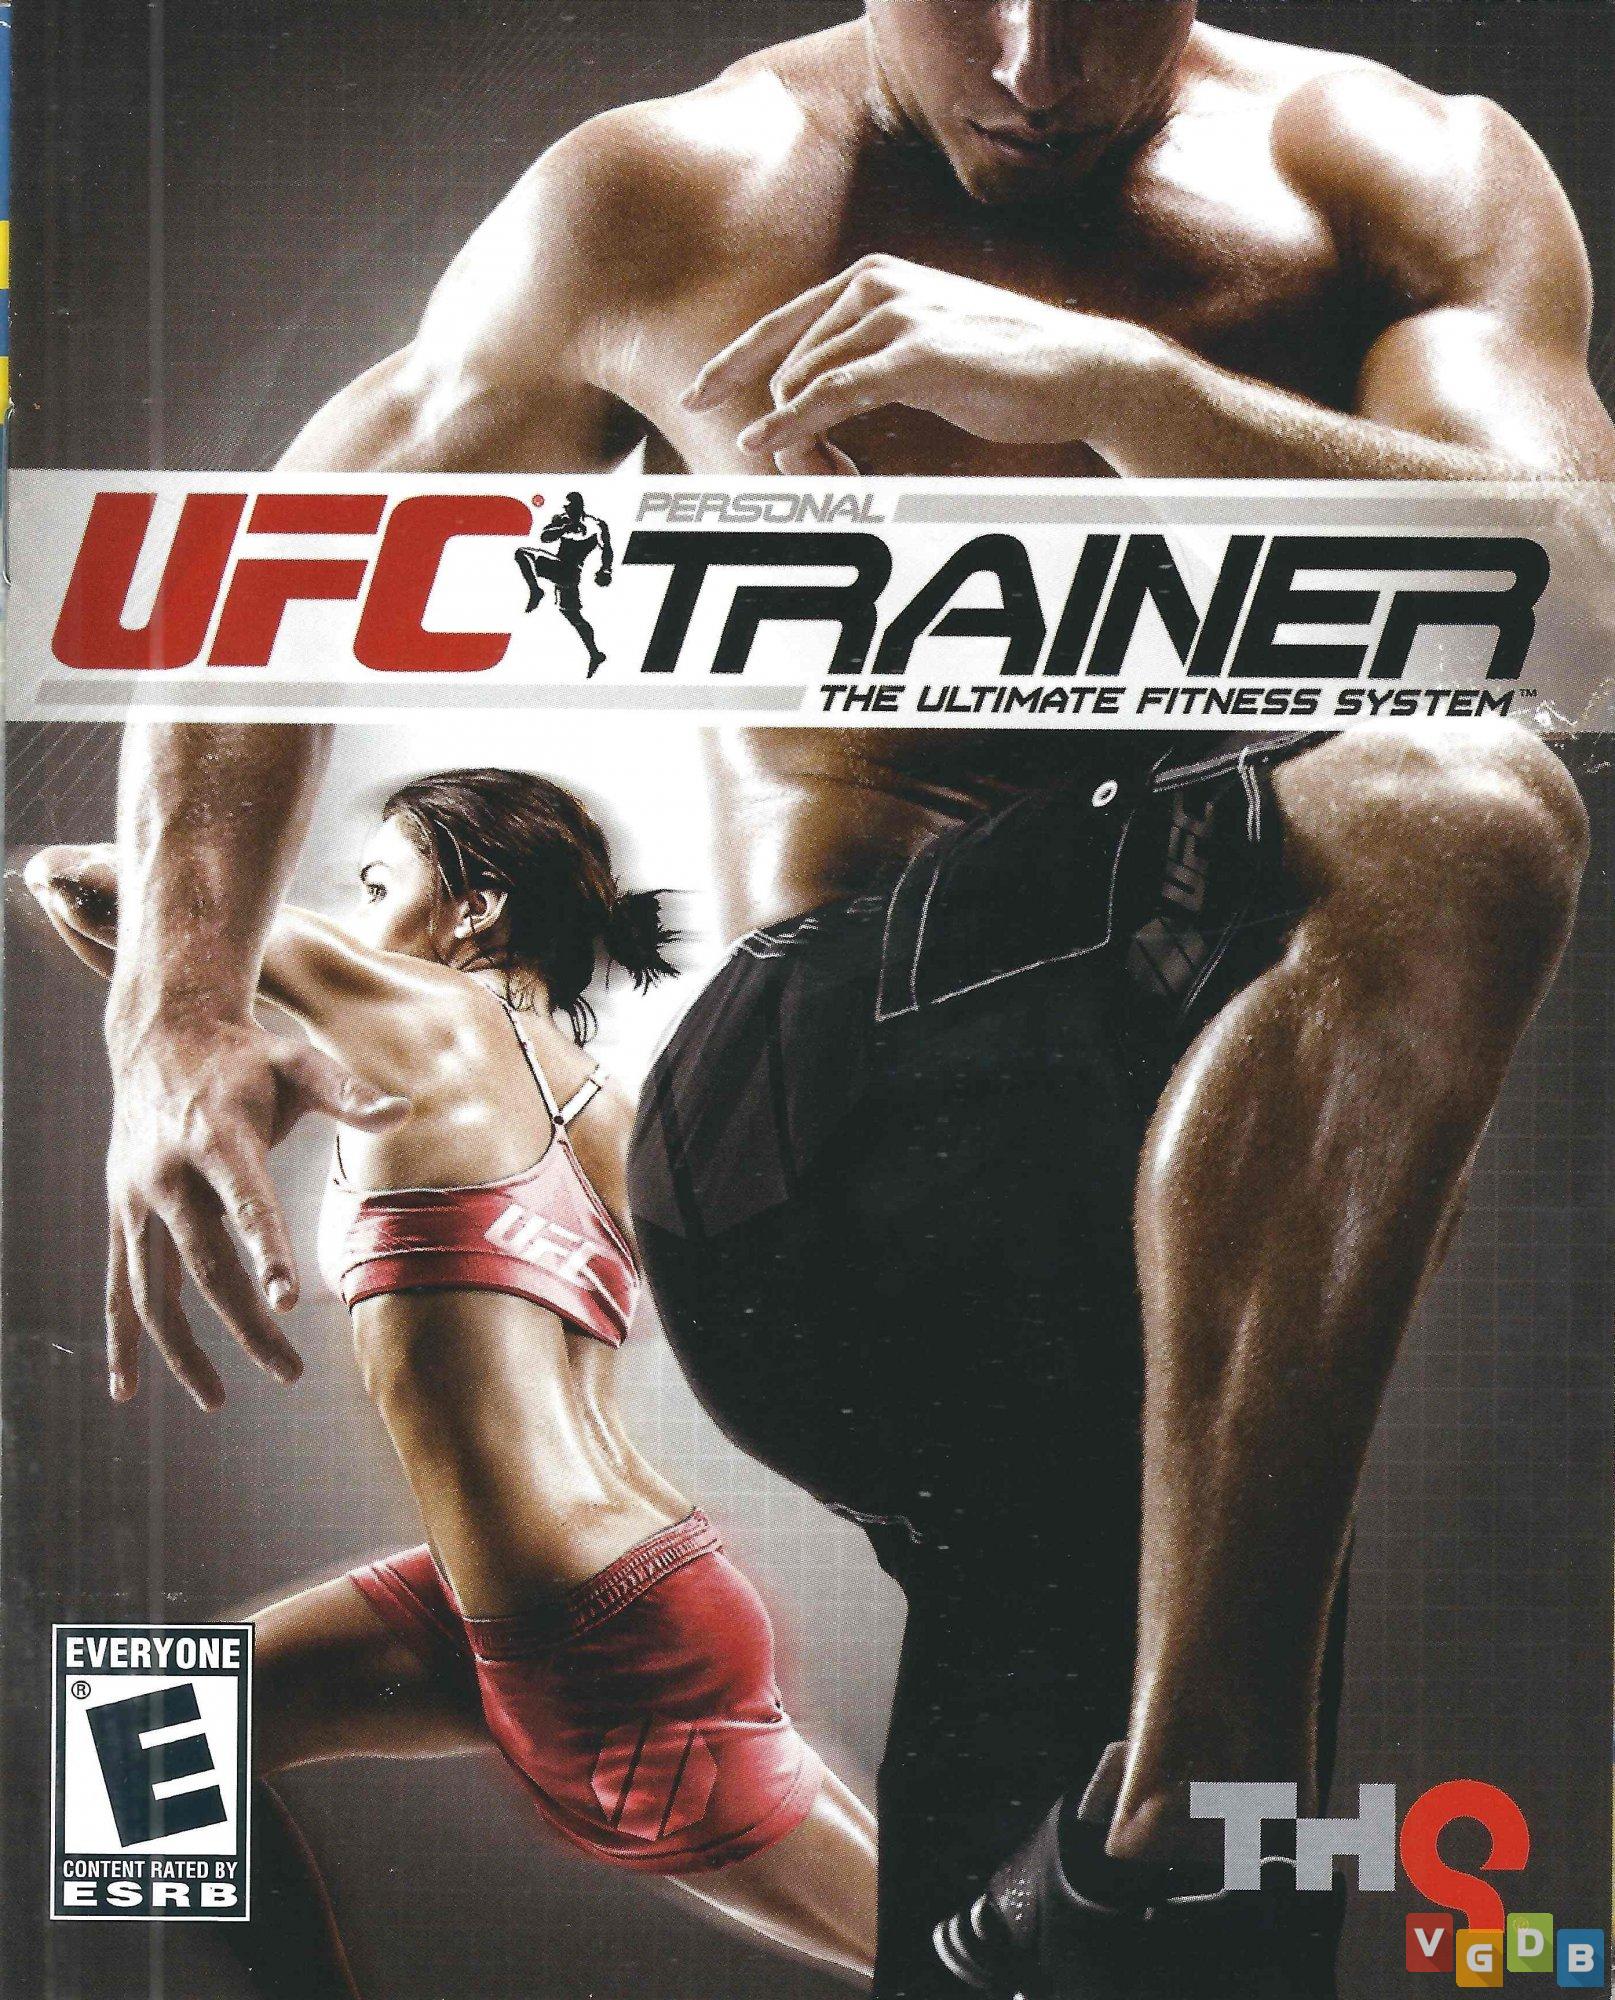 UFC Personal Trainer: The Ultimate Fitness System - VGDB - Vídeo